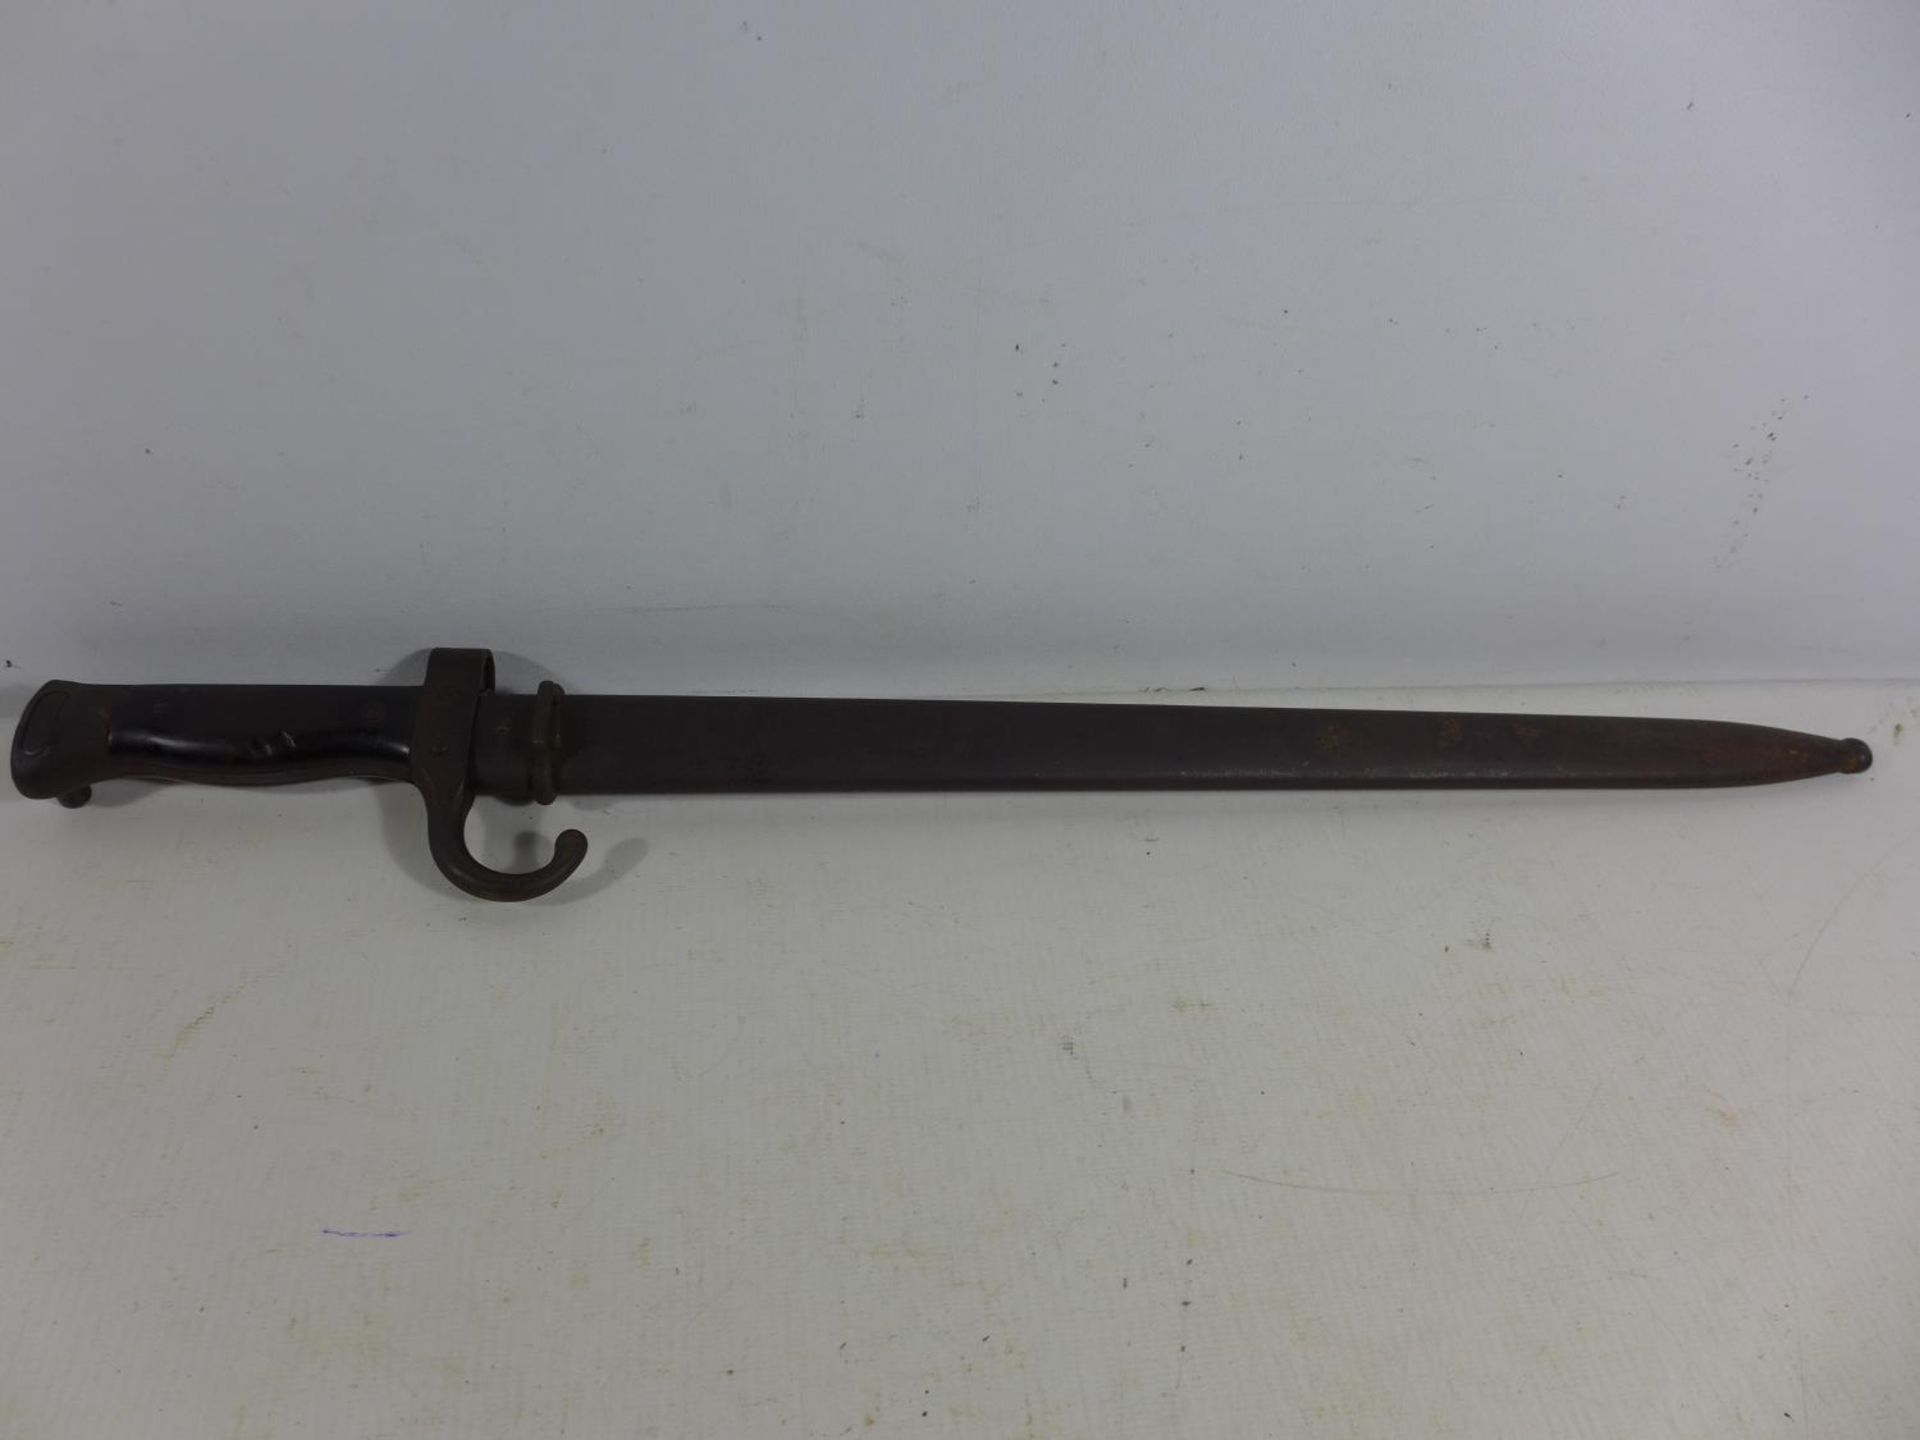 A FRENCH 1892 PATTERN BAYONET AND SCABBARD 40CM BLADE, LENGTH 54CM - Image 4 of 4